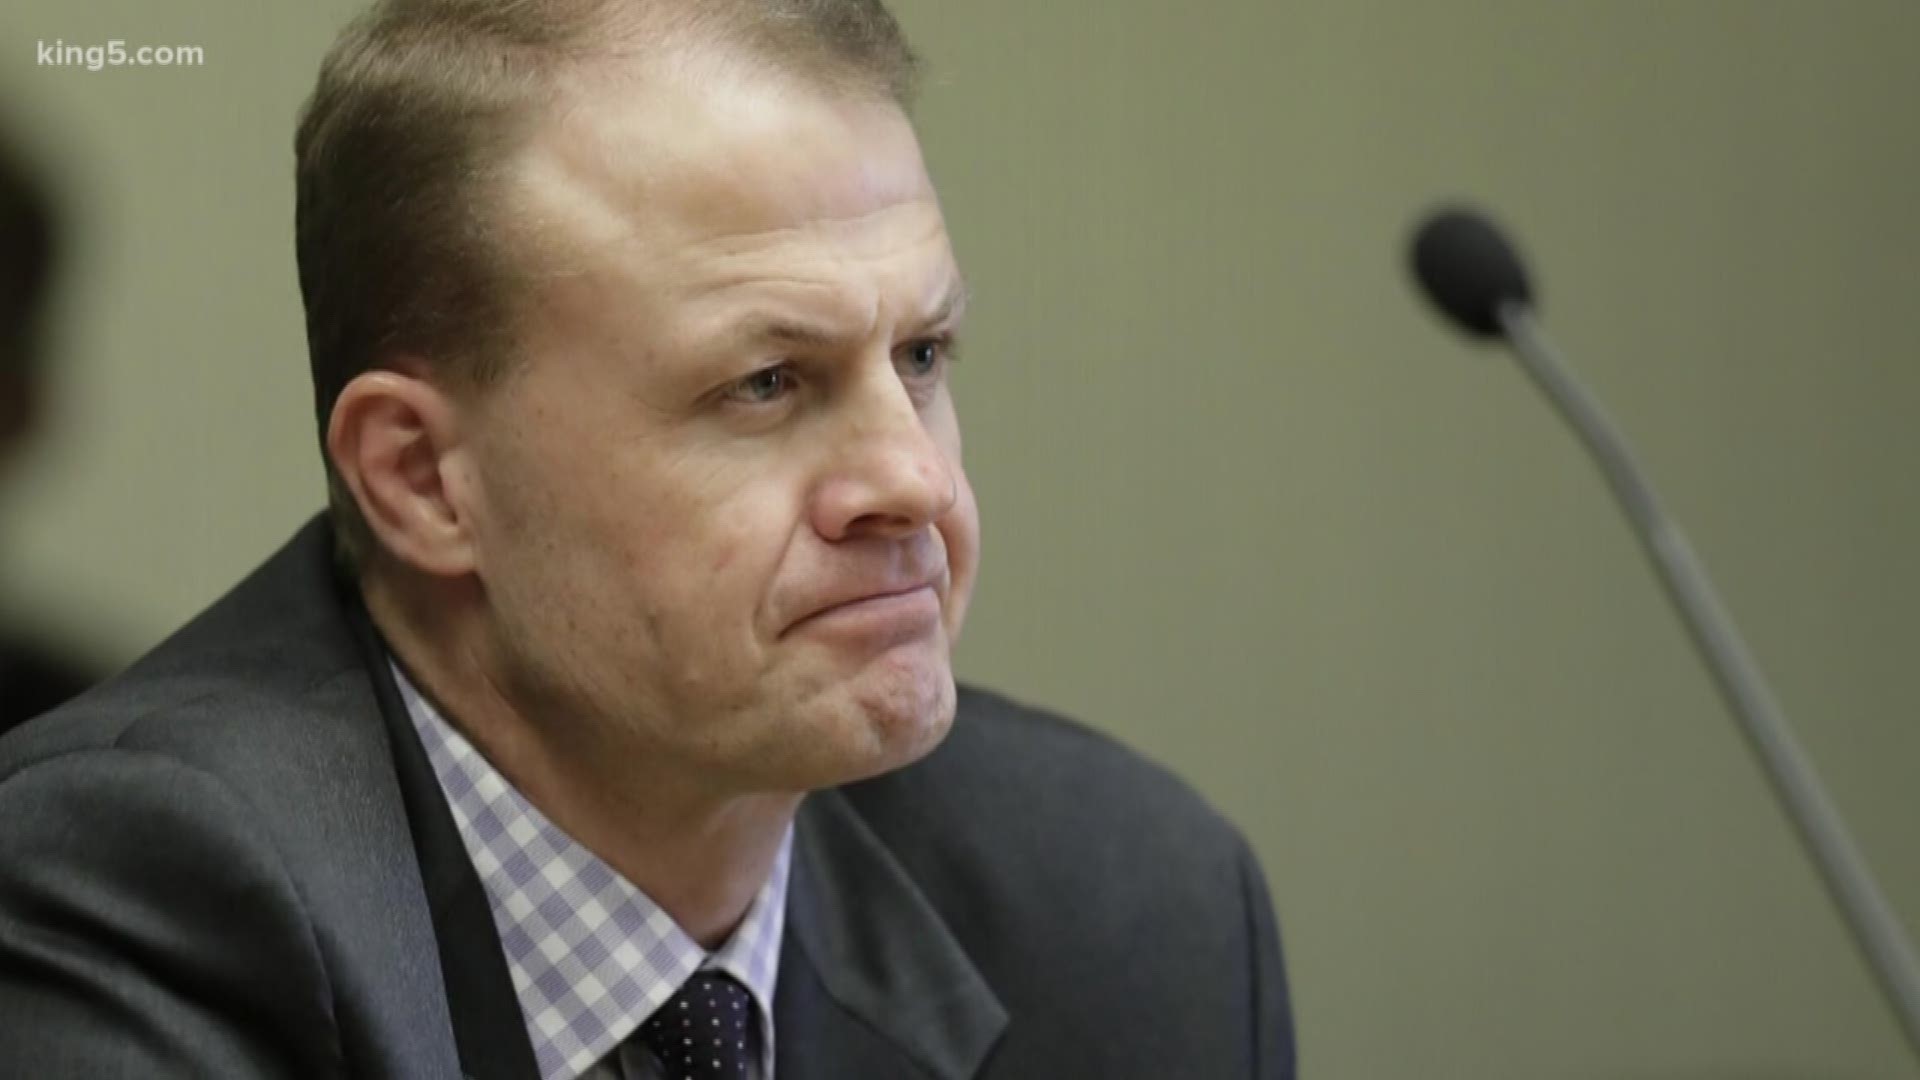 Anti-tax activist Tim Eyman has been hit with further sanctions after spending months in contempt of court for refusing to disclose information about his finances and his business in a campaign finance lawsuit against him.